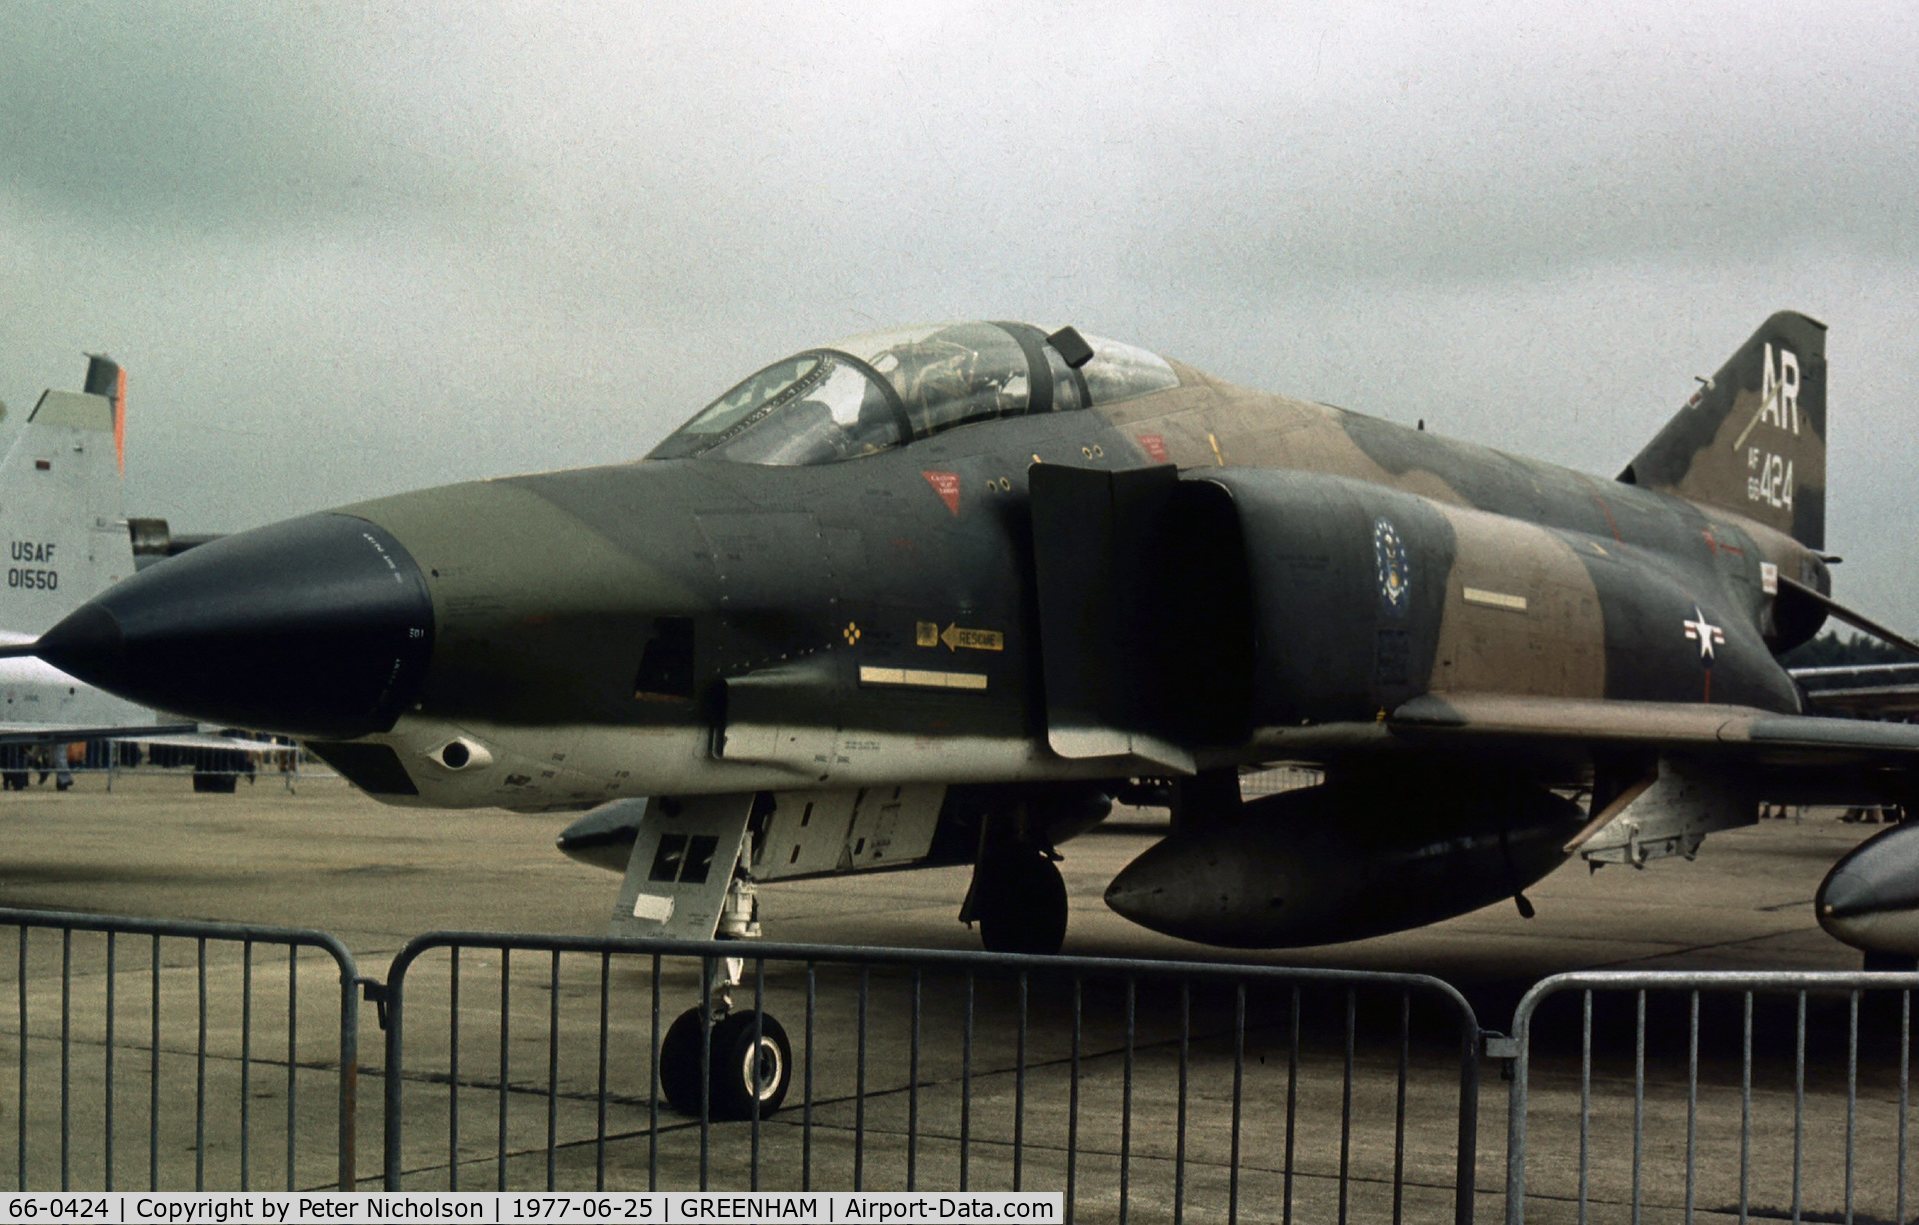 66-0424, 1966 McDonnell RF-4C Phantom II C/N 2182, RF-4C Phantom of 1st Tactical Reconnaissance Squadron/10th Tactical Reconnaissance Wing at RAF Alconbury on display at the 1977 Intnl Air Tattoo at RAF Greenham Common. Sadly, this aircraft and crew were lost two months later - R.I.P